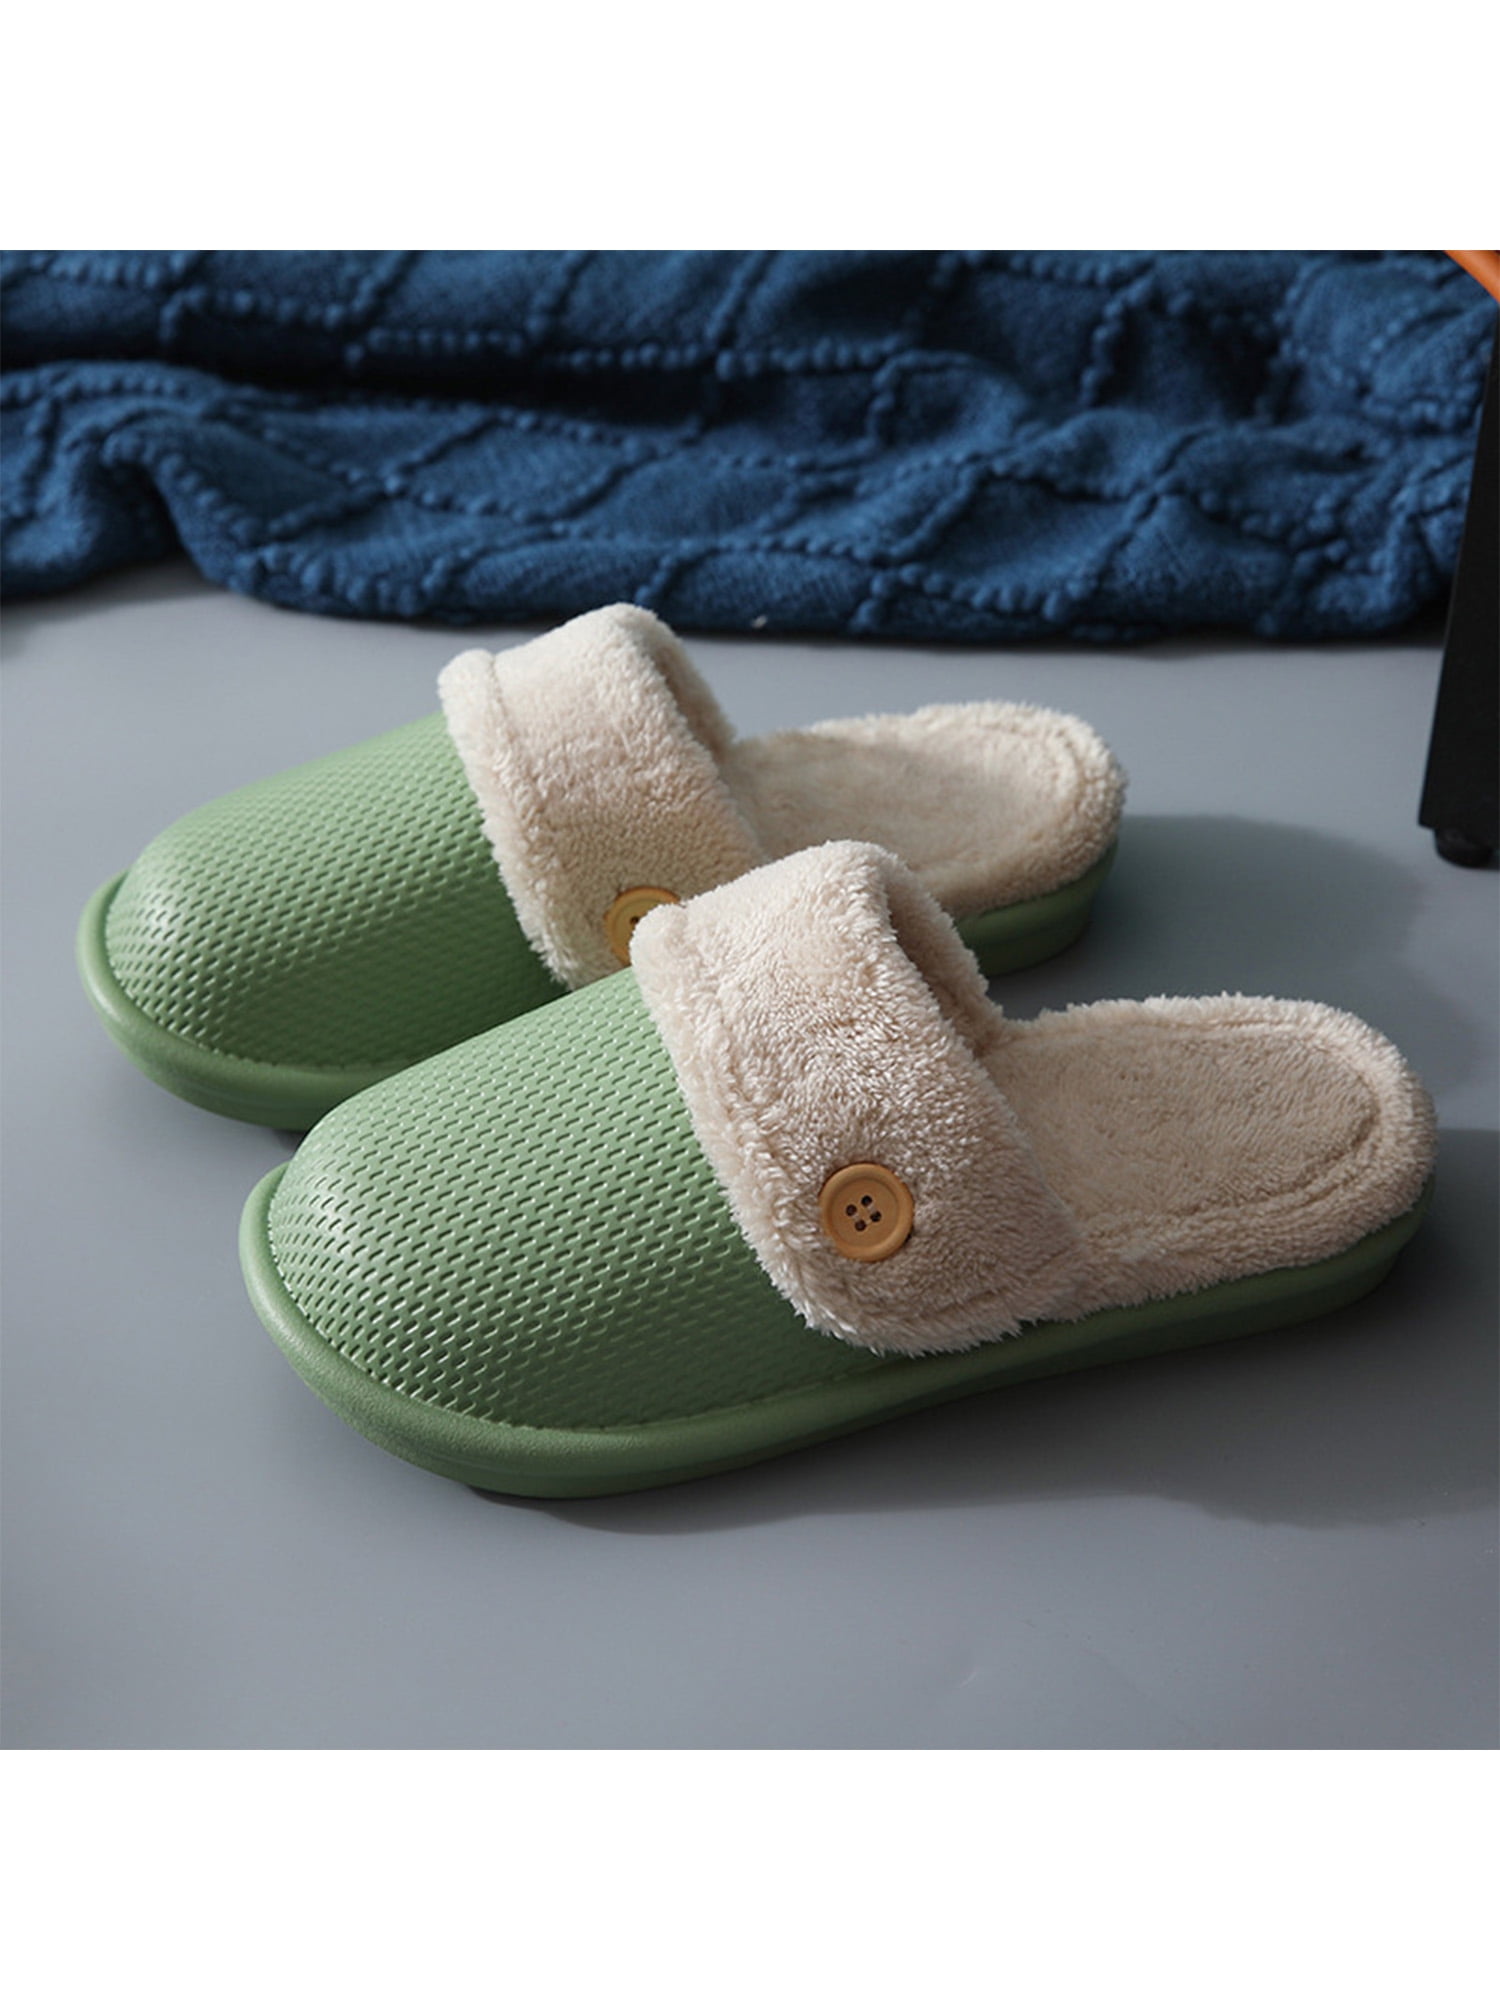 Unisex Home Indoor House Slippers Couple Soft Non Slip Warm Shoes Winter - Walmart.com